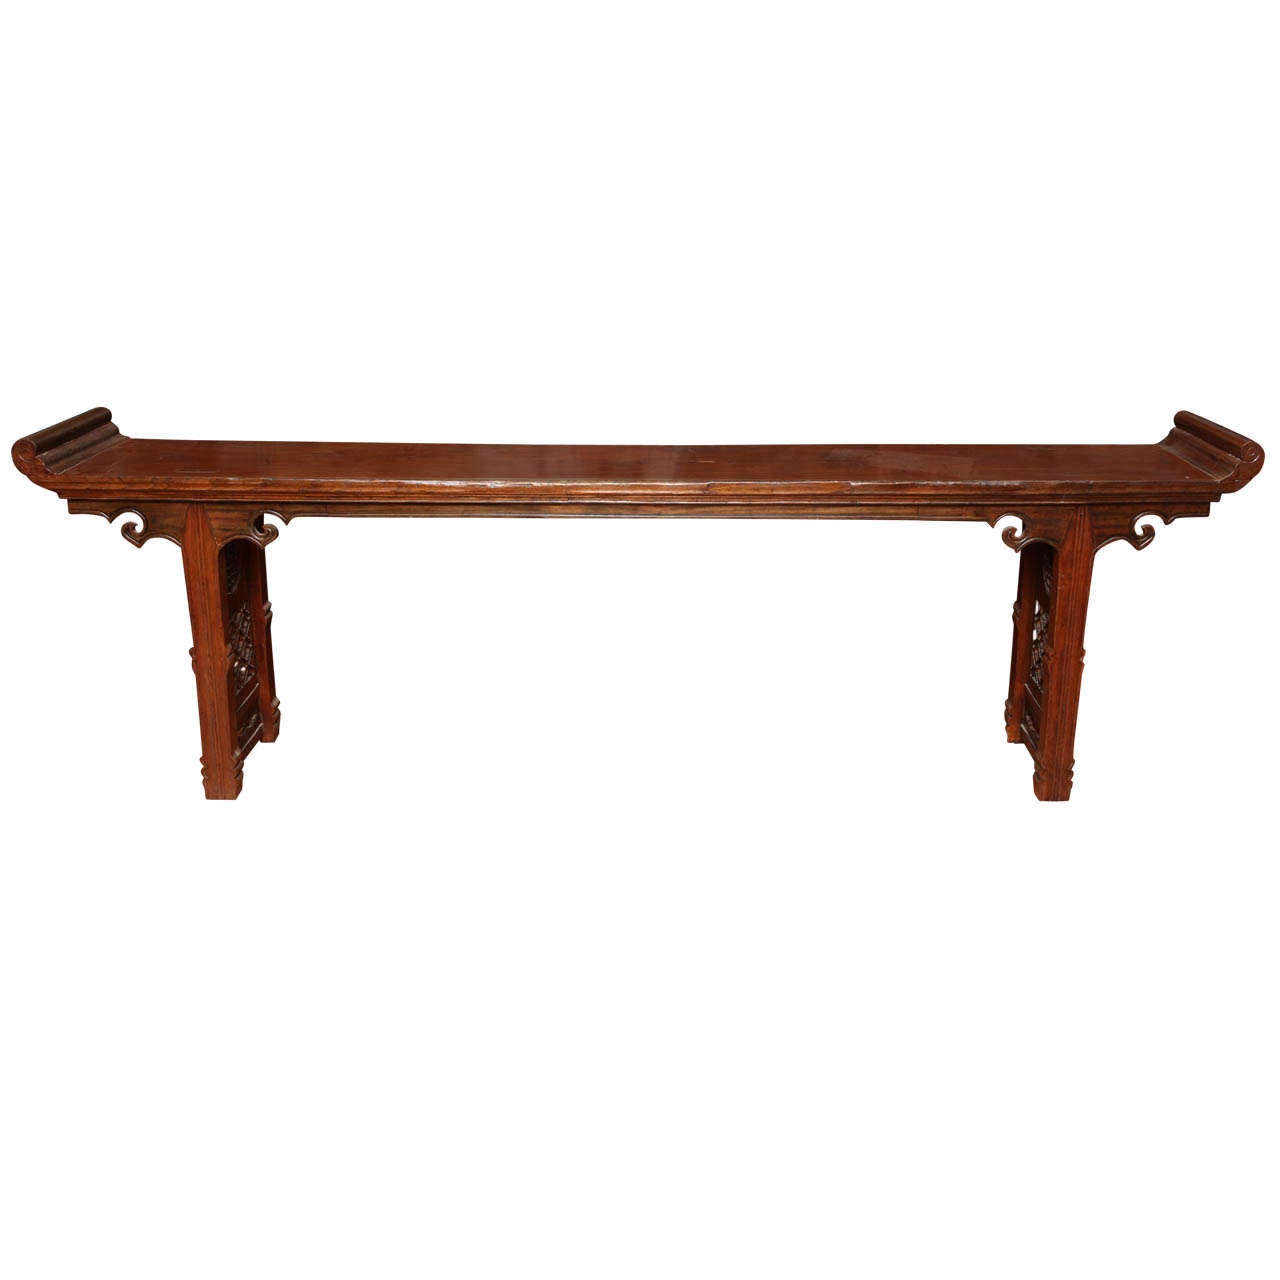 19th Century Chinese Long Carved Wooden Console Table with Fretwork Design